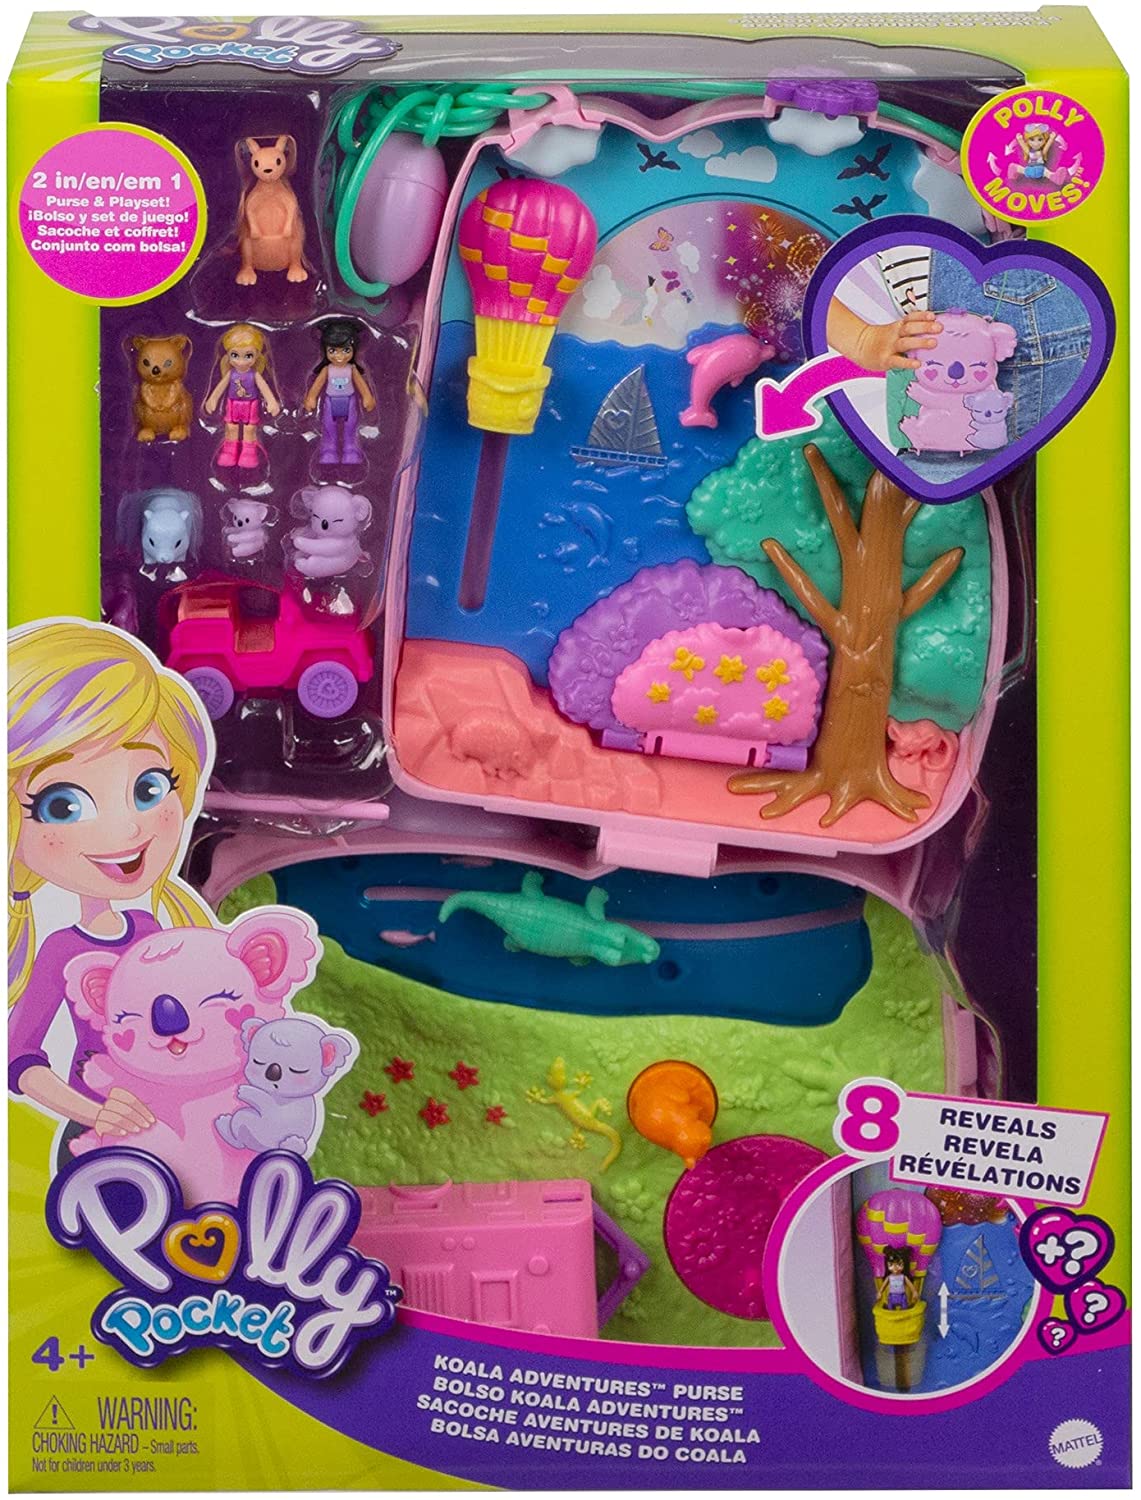  Polly Pocket Playset, Friends Compact With 6 Dolls and